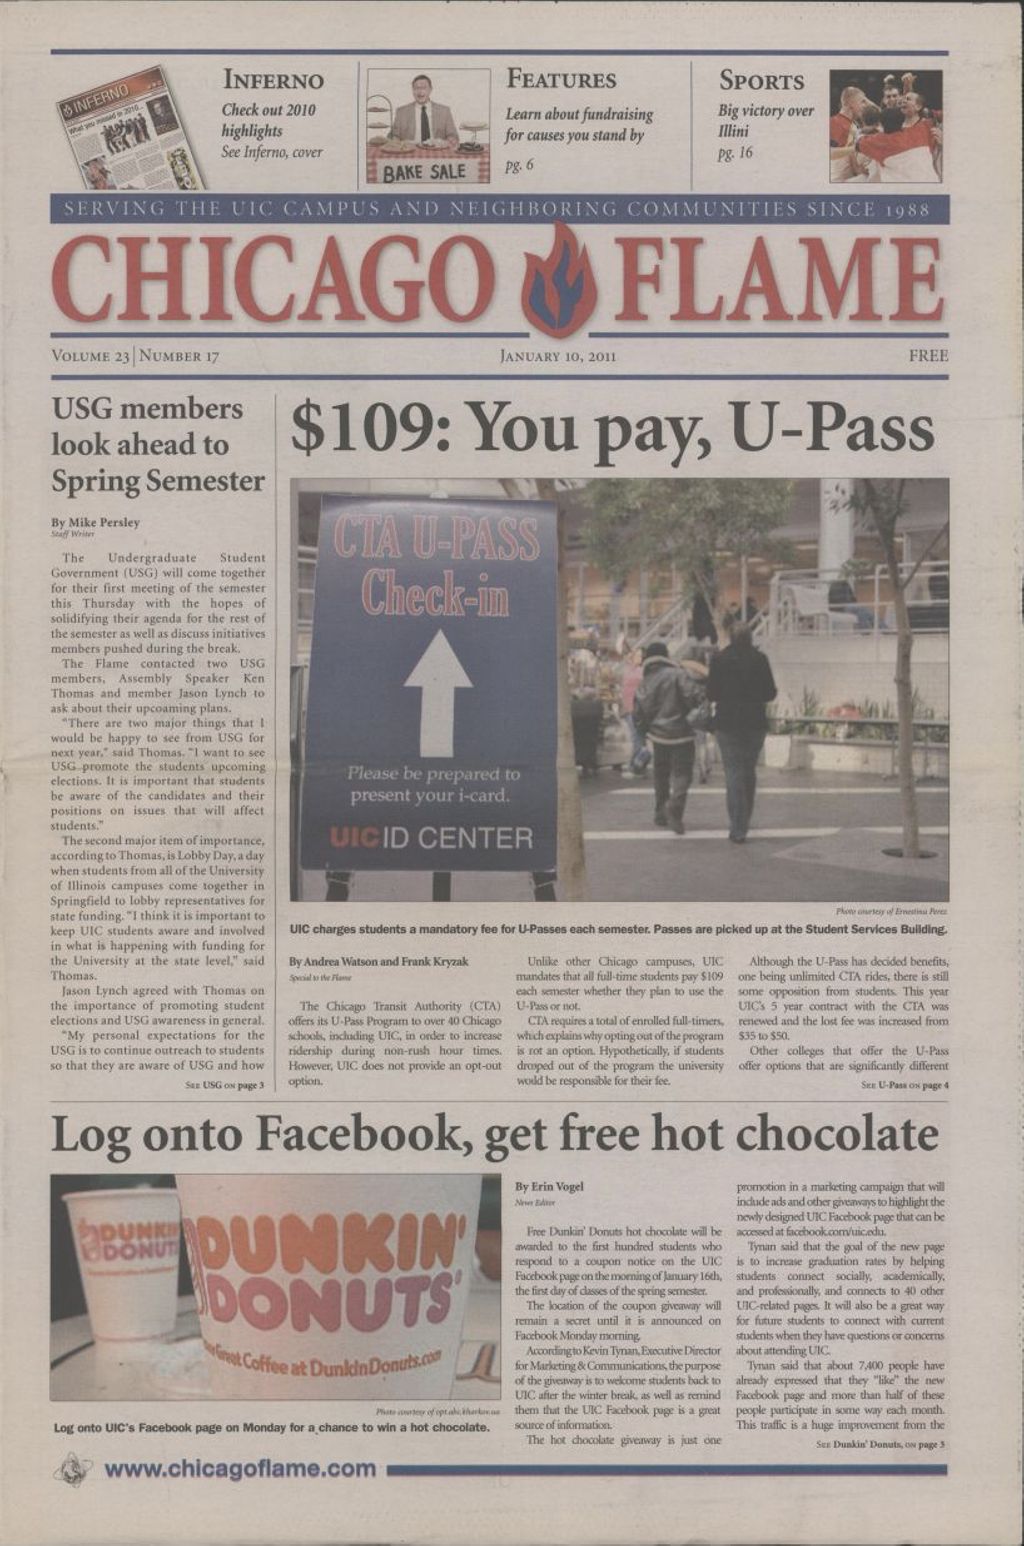 Miniature of Chicago Flame (January 10, 2011)